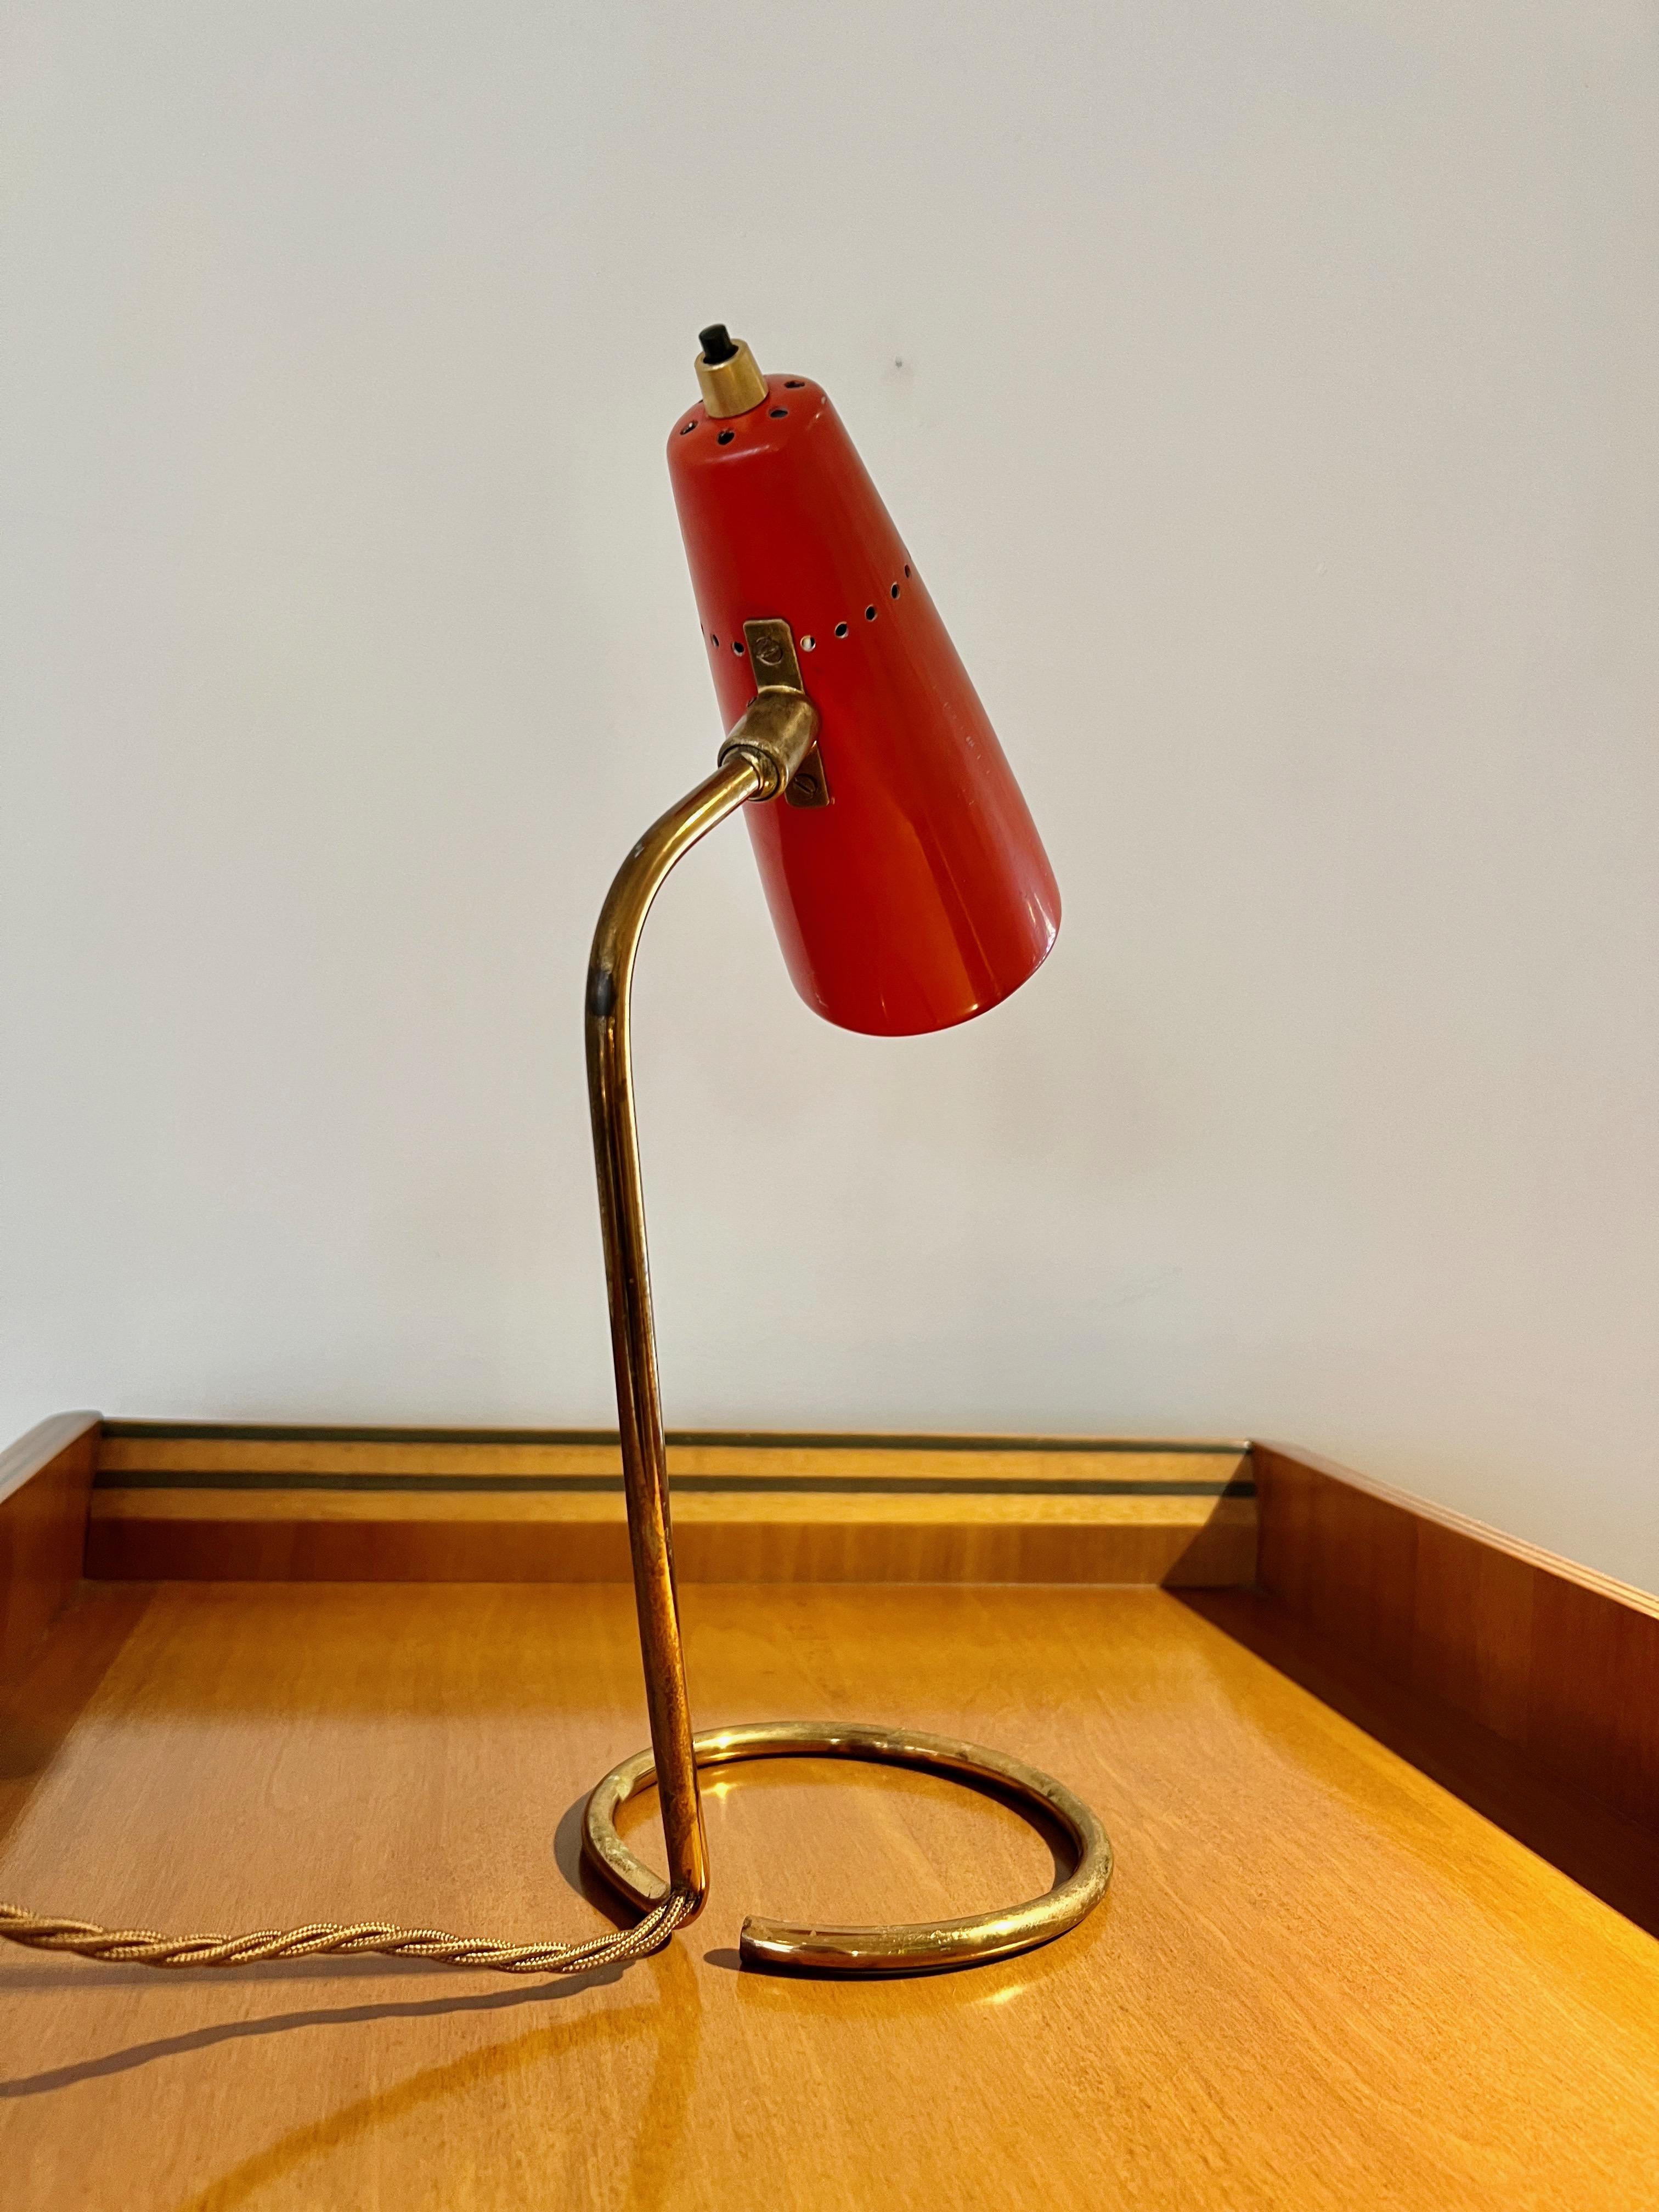 A charming 1950s small desk lamp by Stilnovo, Milan, with a pivoting 'shade' in brick red enamelled metal, on brass slender tube support.
Re-wired to UK safety standard.

With Stilnovo Milano Italy label.